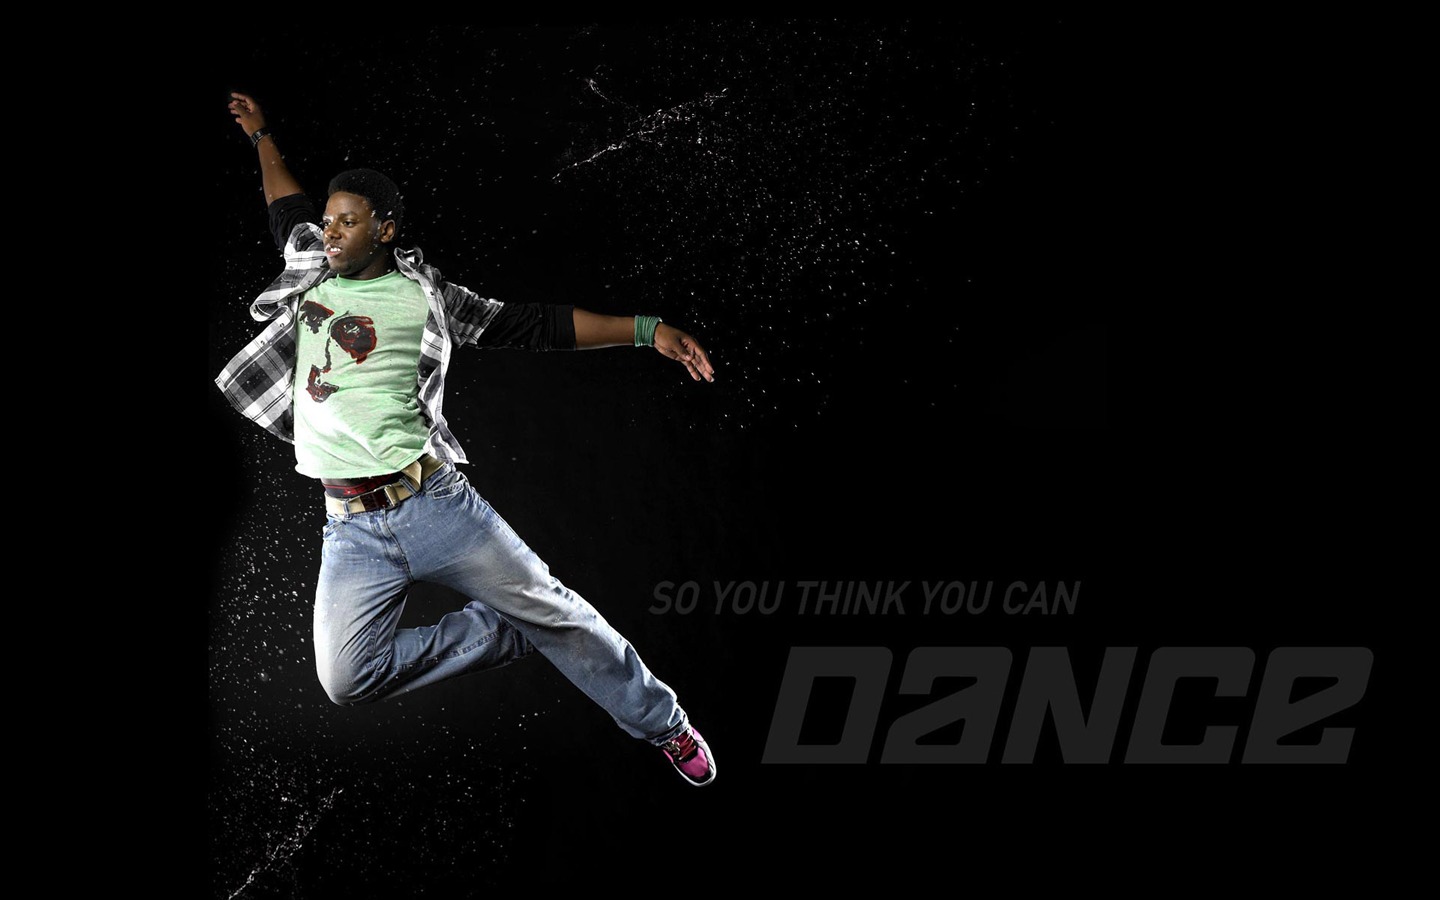 So You Think You Can Dance wallpaper (1) #18 - 1440x900